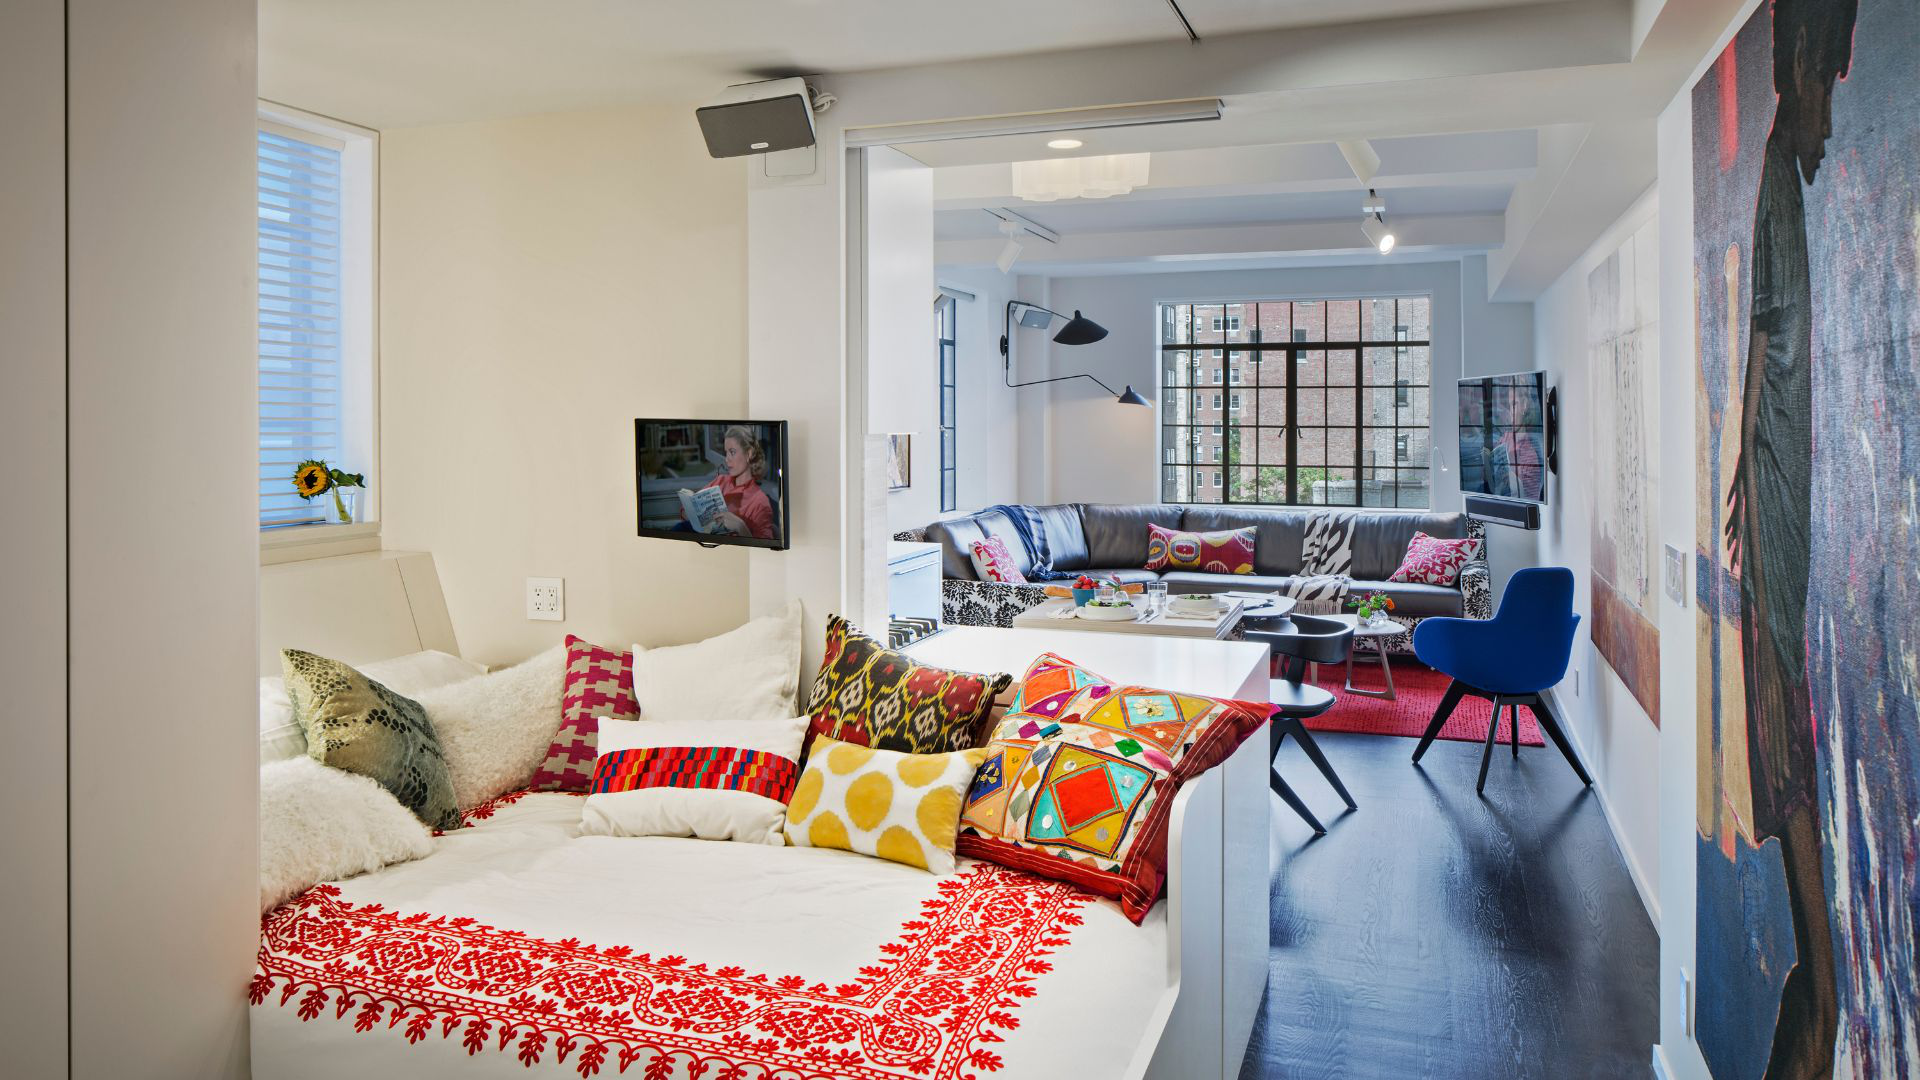 Dark floors set off a white bed adorned with vibrant, multicolored pillows and covered with a view through the apartment to the large window and living area beyond.